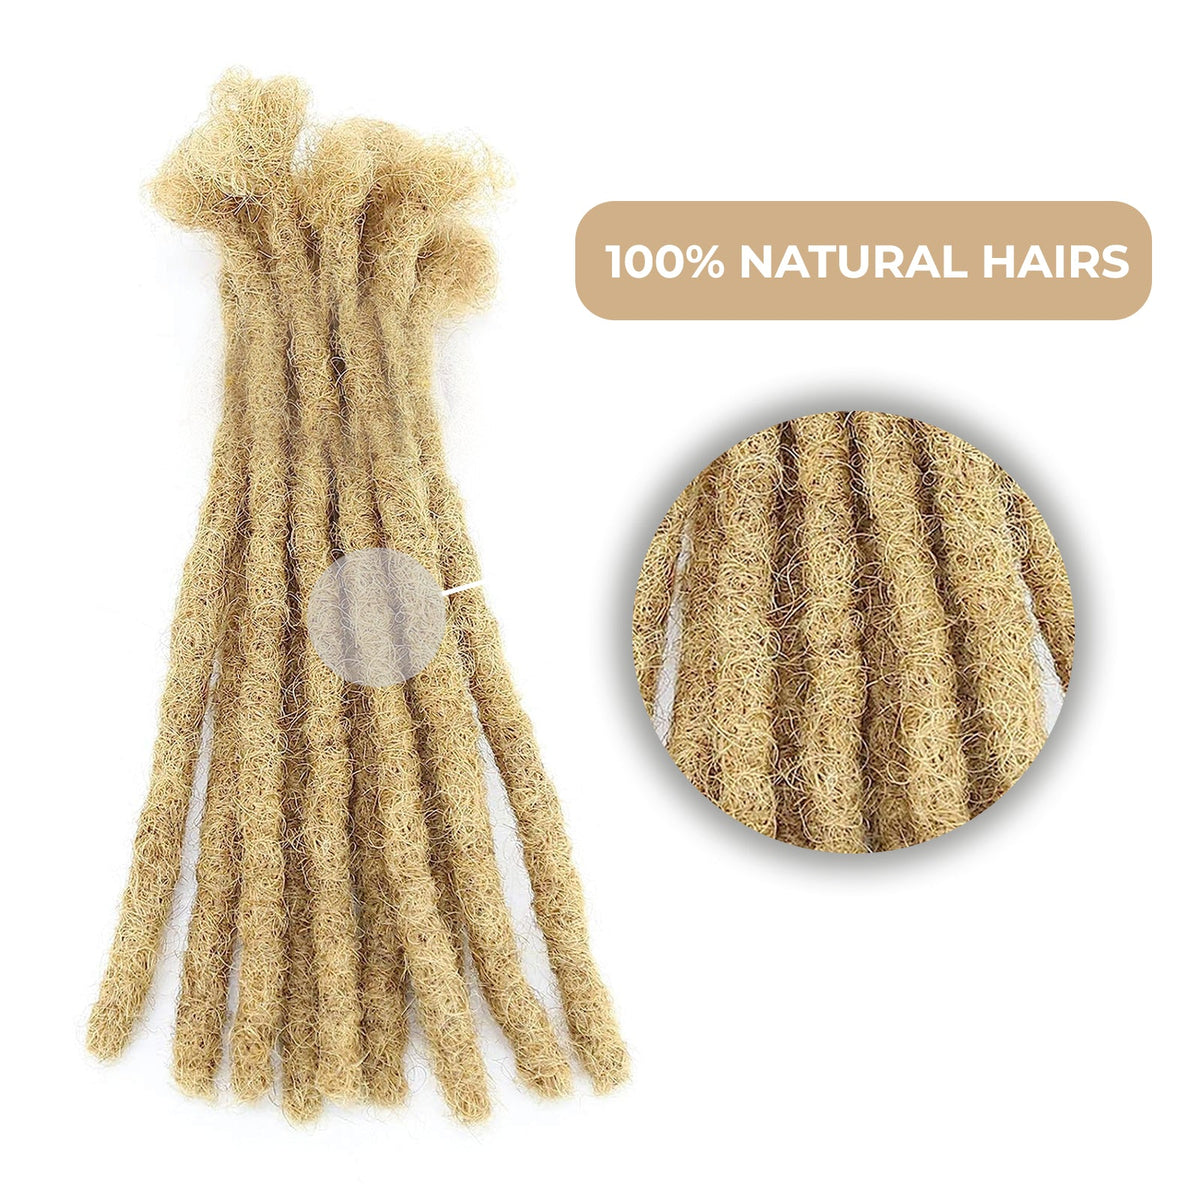 100% Human Hair Blonde Dreadlock Extensions 8Inch 10 Strands Handmade Natural Loc Extensions Human Hair Bundle Dreads Extensions For Woman & Men Can be Dyed (27/Honey Blonde 8inch length 0.8cm Width)